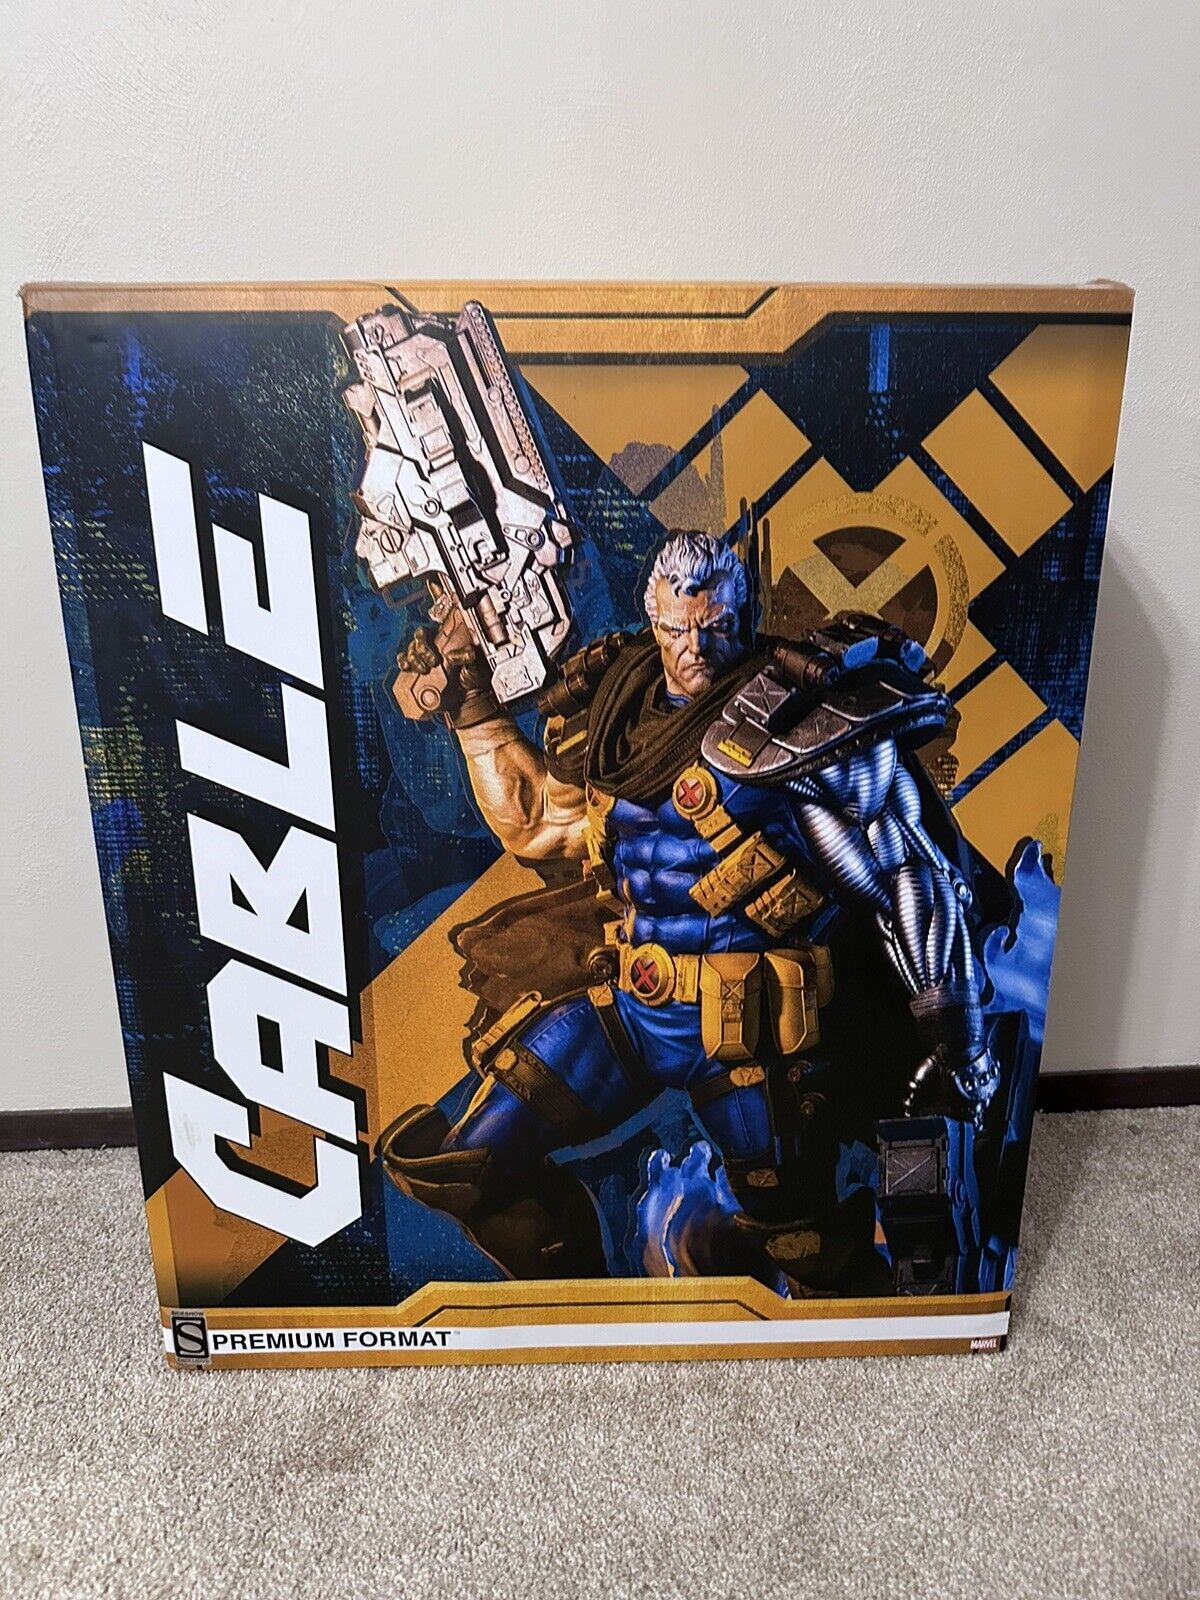 CABLE Premium Exclusive Format Figure Statue From sideshow Collectibles 573/1000